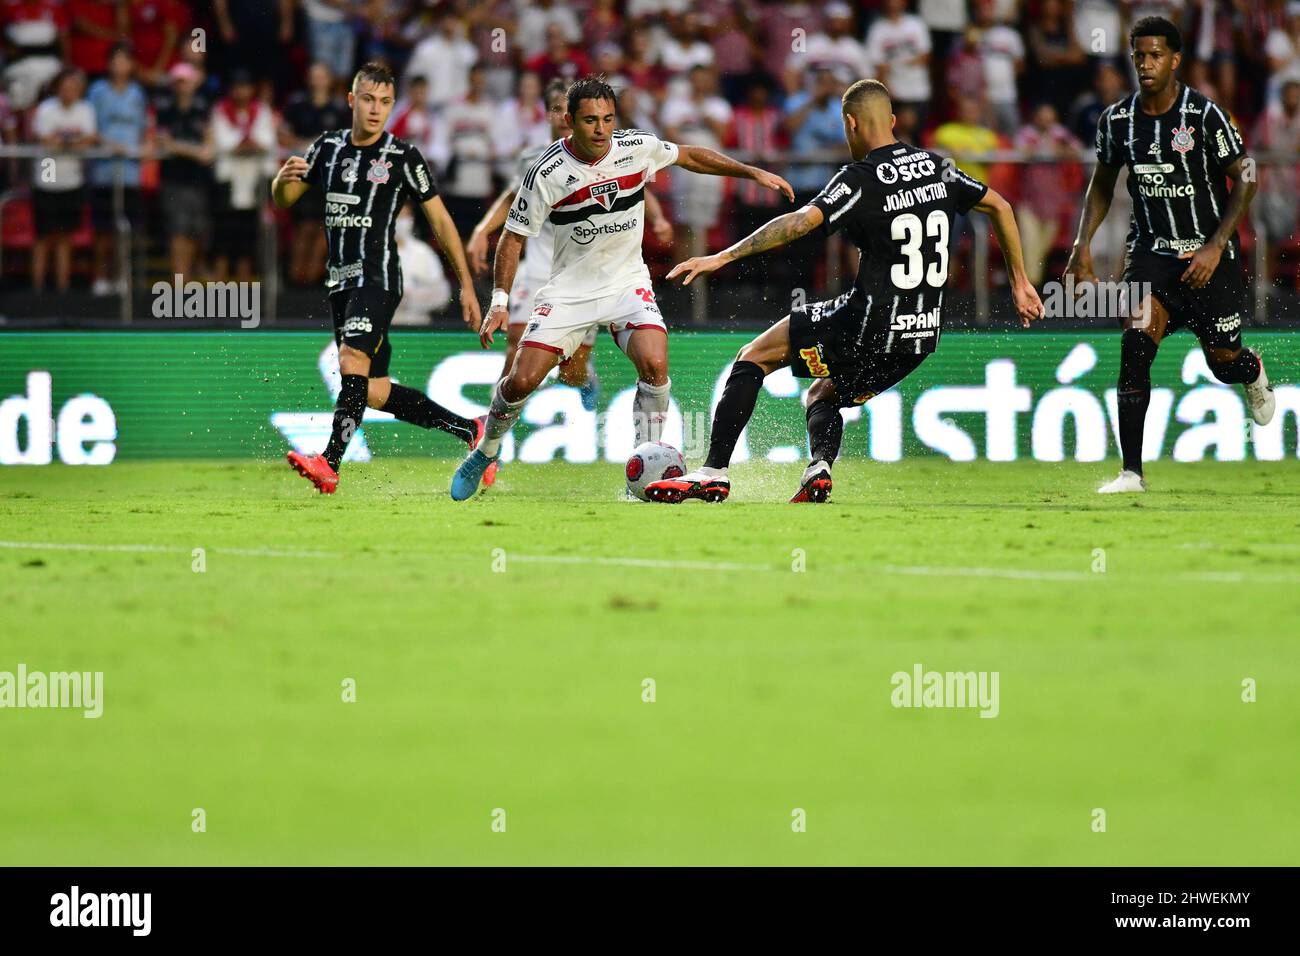 SAO PAULO/SP - MARCH 5: Éder of São Paulo fights for the ball with João Victor of Corinthians during Campeonato Paulista A1 match between São Paulo and Corinthians at Cícero Pompeu de Toledo Stadium  on March 5, 2022 in Sao Paulo, Brazil. (Photo by Leandro Bernardes/Pximages) Stock Photo